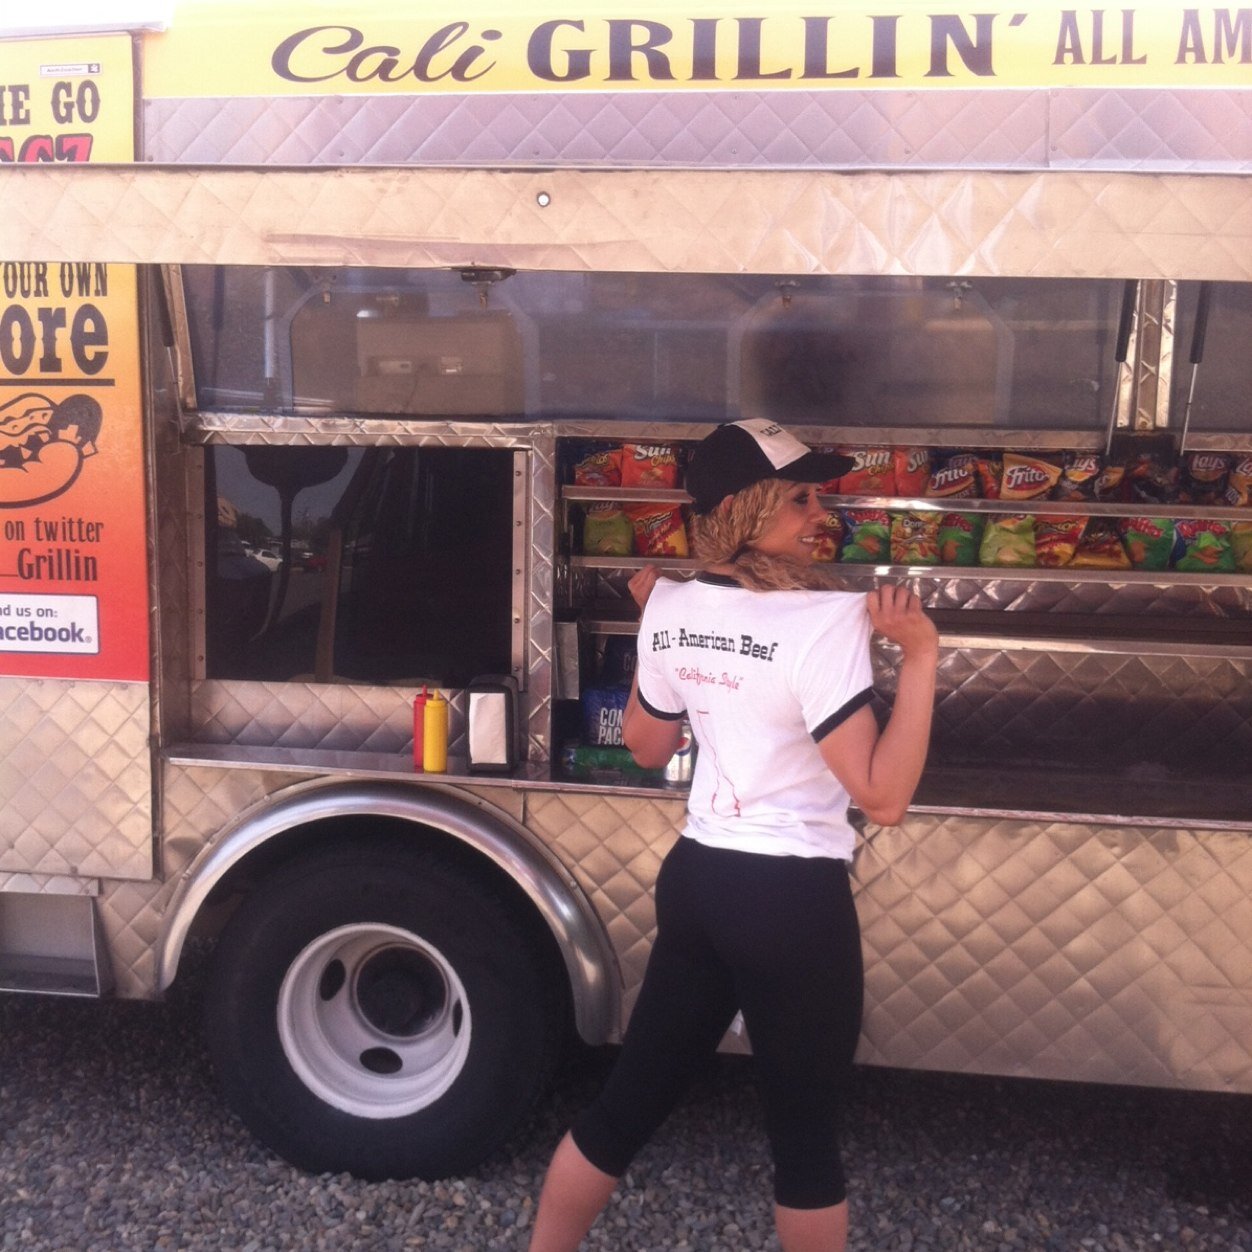 Cali Grillin' is an American food truck located in the Central Valley here to serve you the BEST gourmet burgers, fries & sides on wheels!